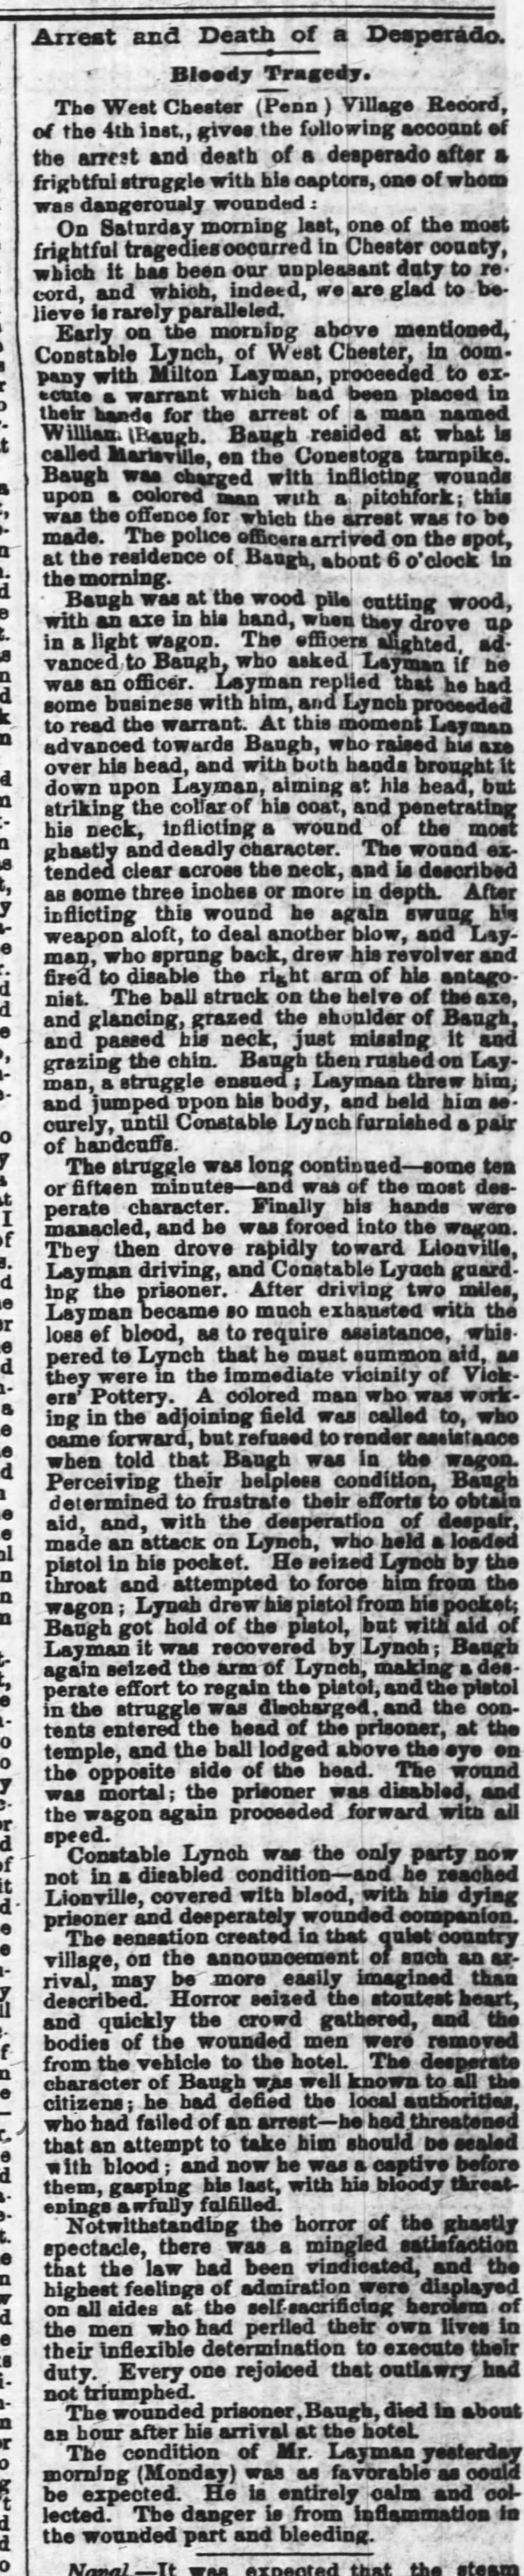 12 Aug 1857 from the Times - Picayune, New Orleans, LA